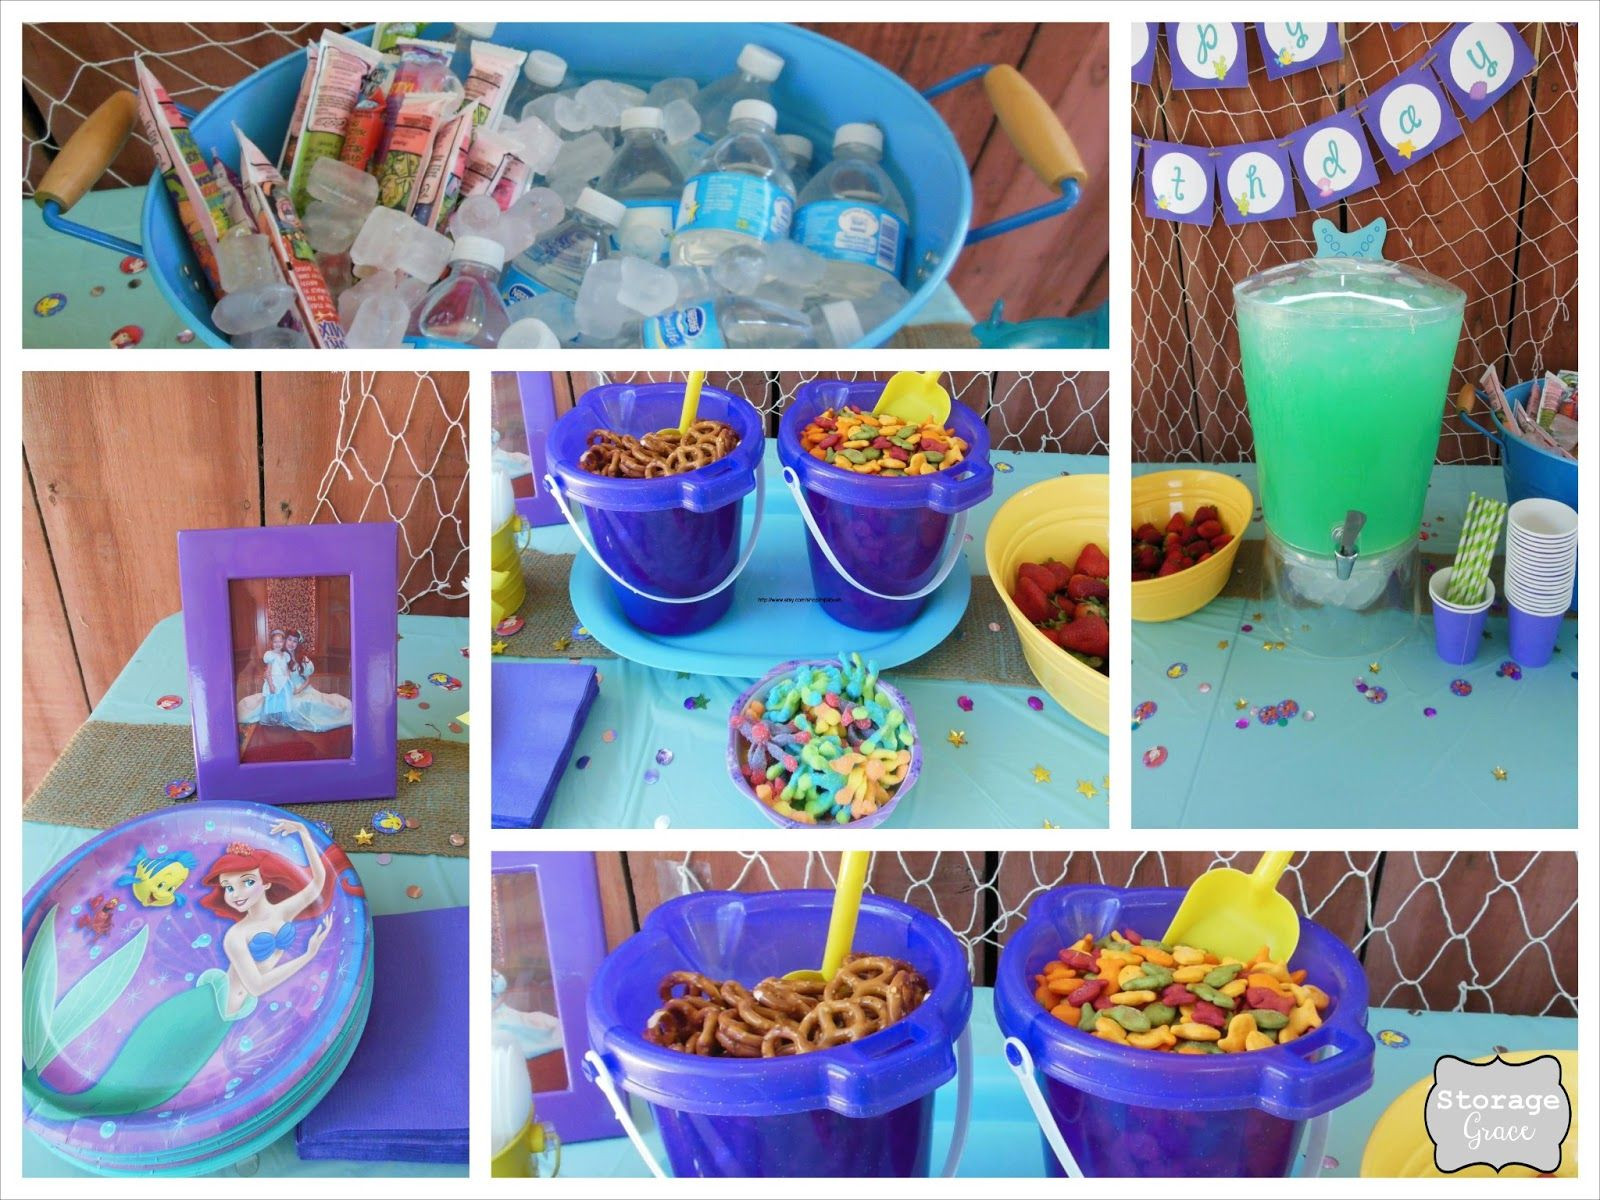 Mermaid Party Ideas 4 Year Old
 Kylie turned 4 years old this past May and requested a